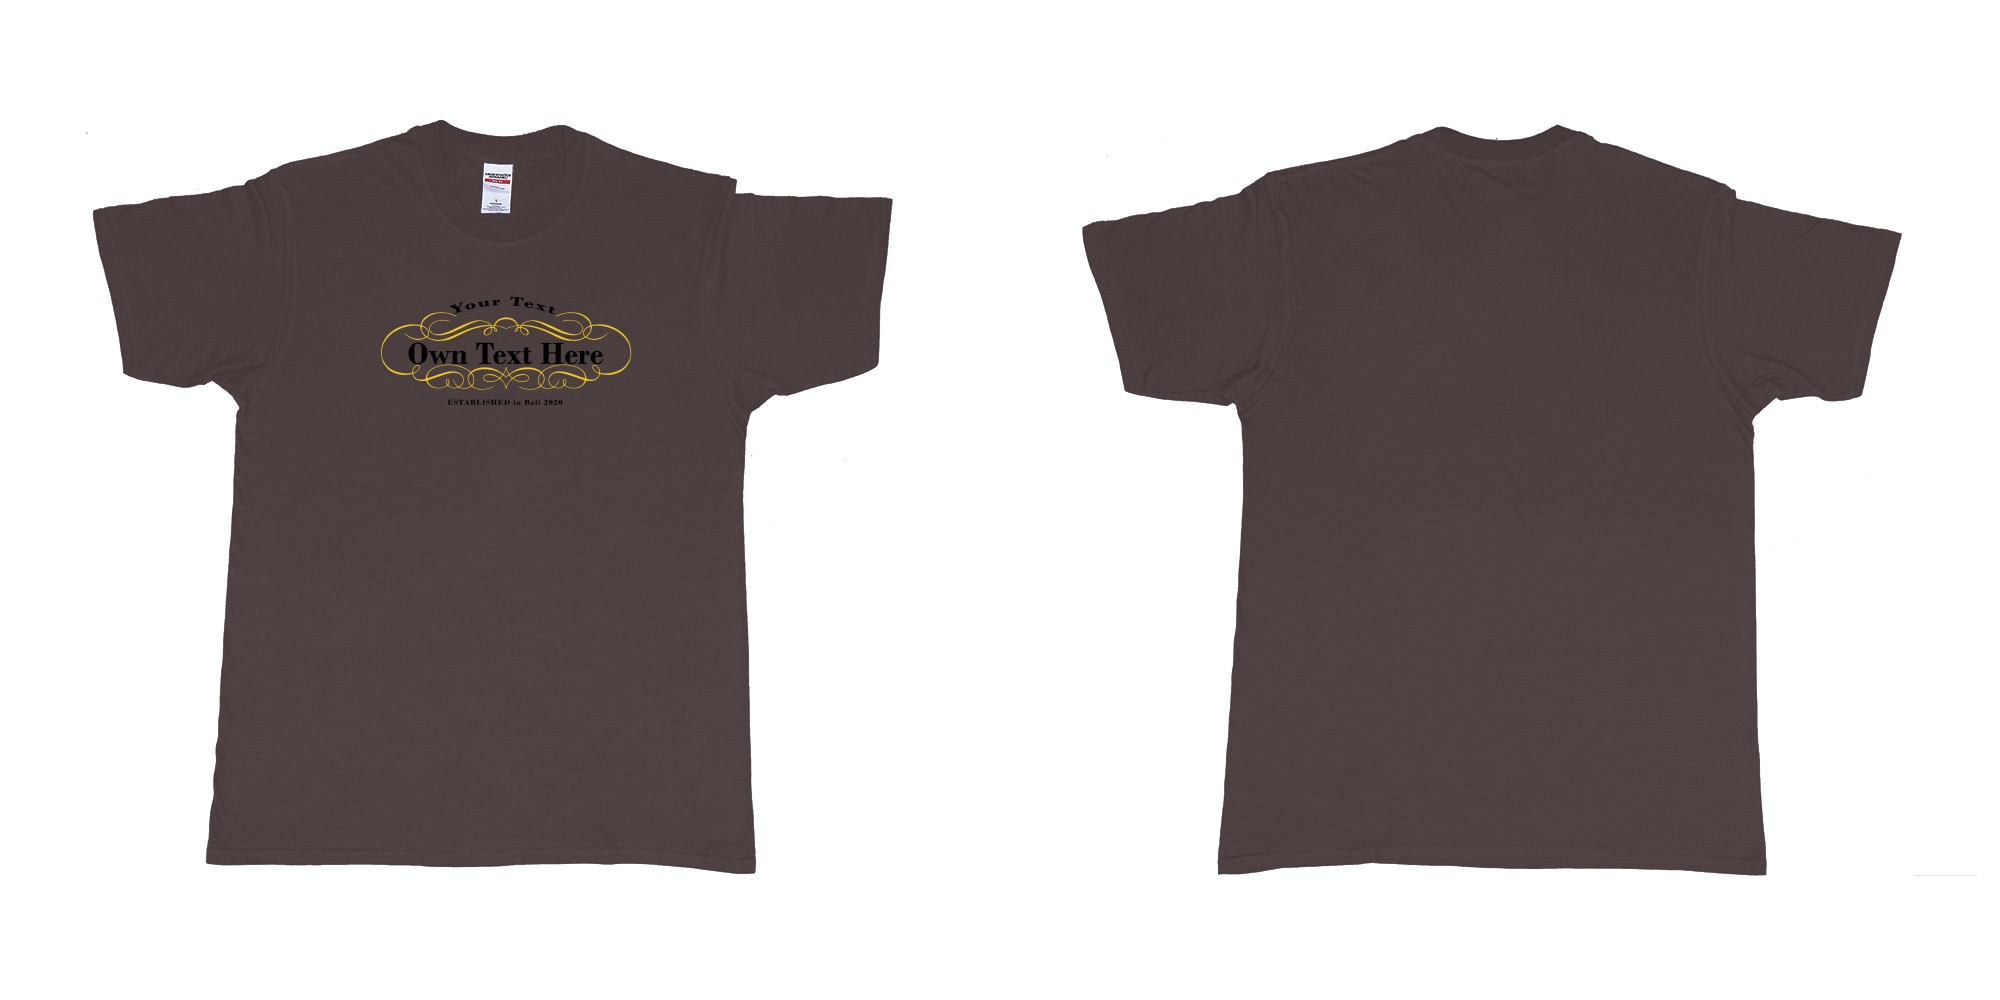 Custom tshirt design Laurent perrier in fabric color dark-chocolate choice your own text made in Bali by The Pirate Way